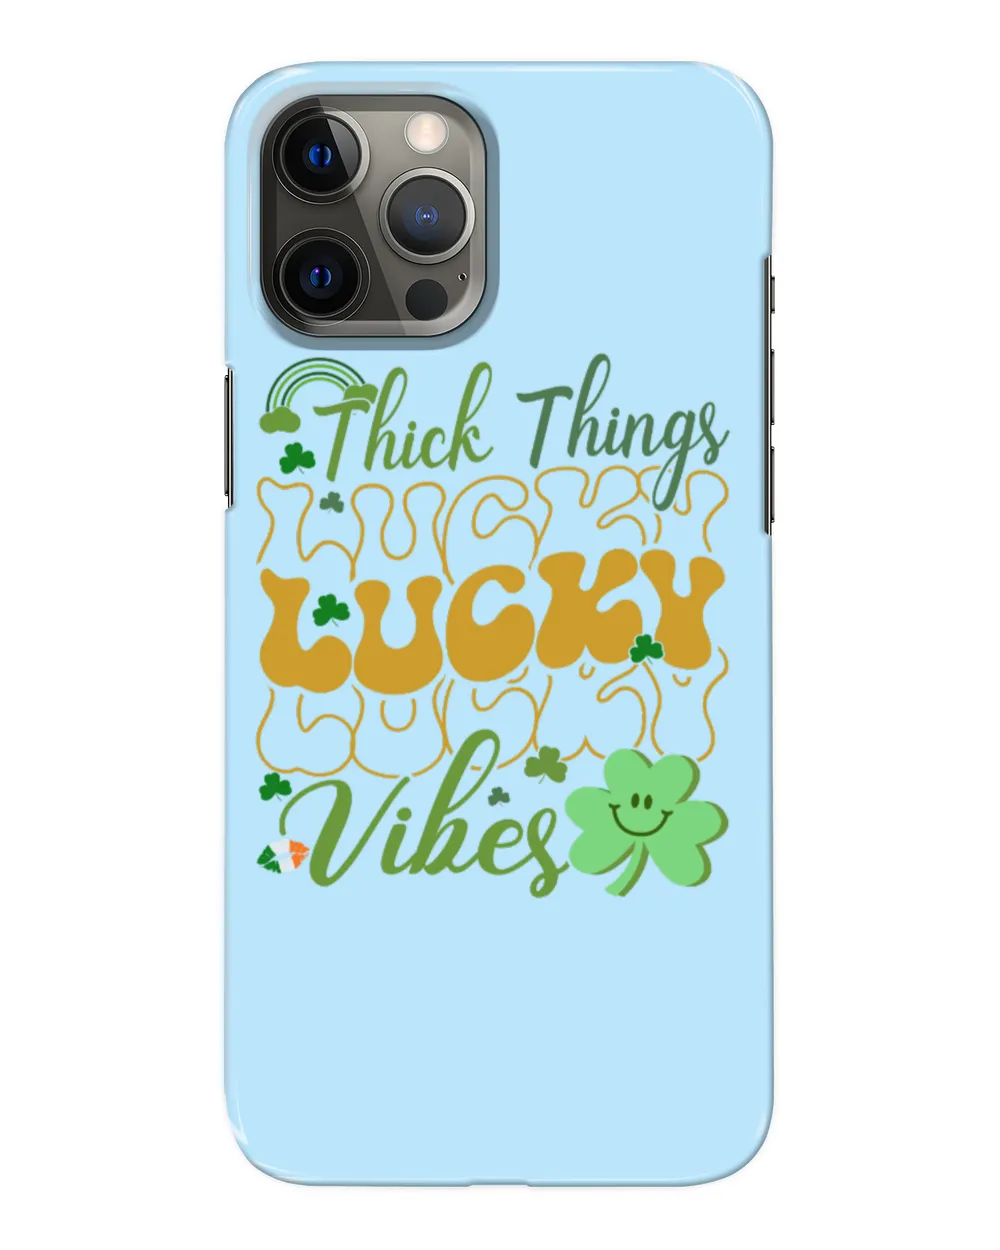 Thick Things Lucky Vibes Sweatshirt, Hoodies, Tote Bag, Canvas